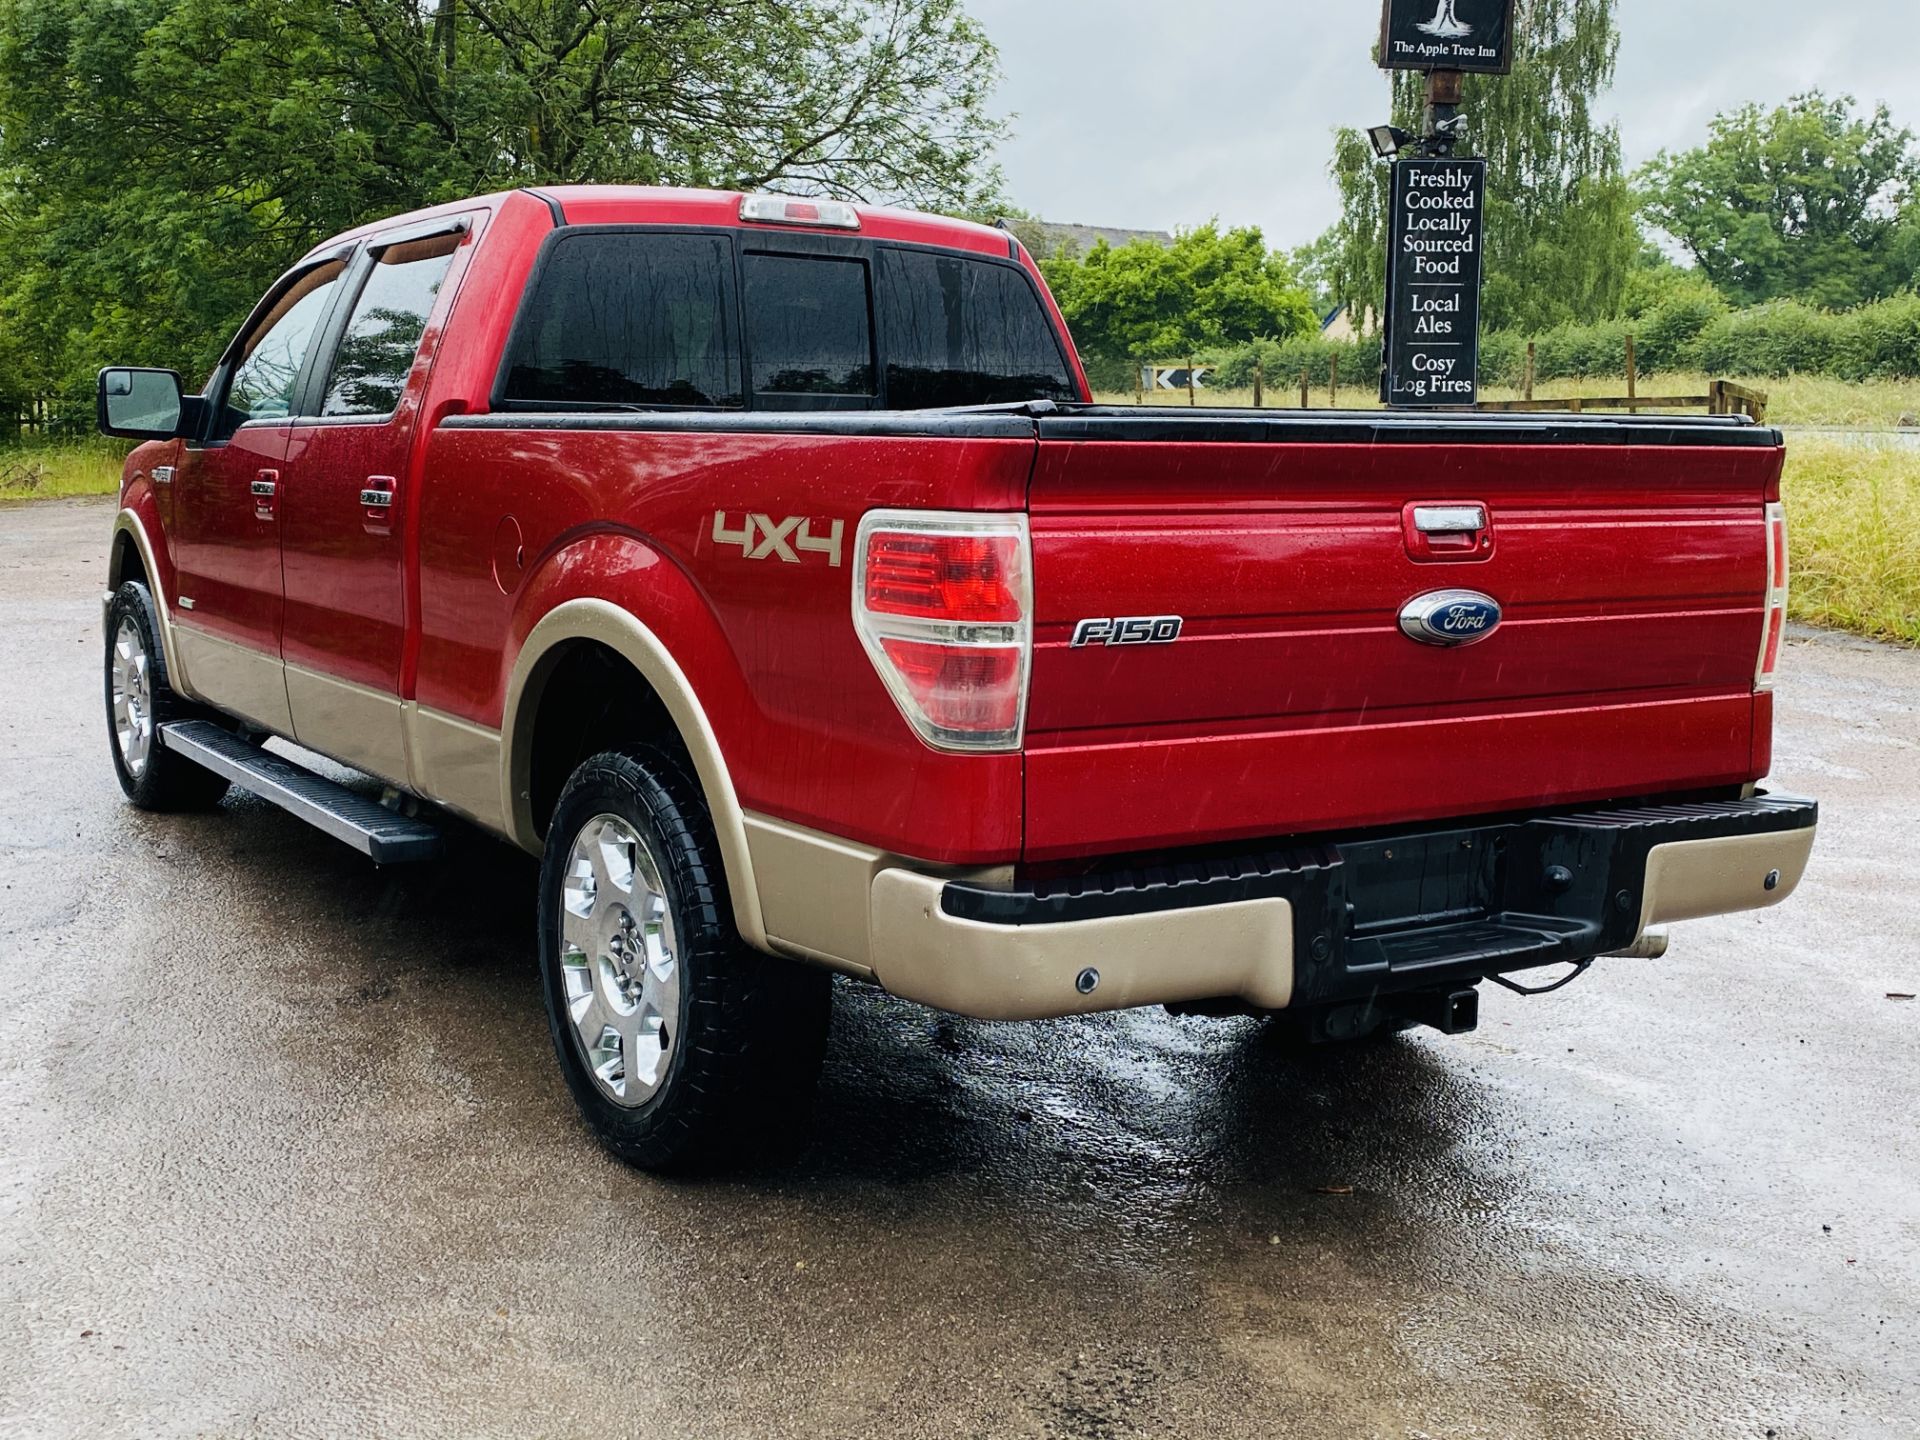 (RESERVE MET)Ford F-150 3.5L V6 Eco-Boost Super-Crew Cab Lariat Model '2012 Year' 4x4 - Fully Loaded - Image 12 of 78